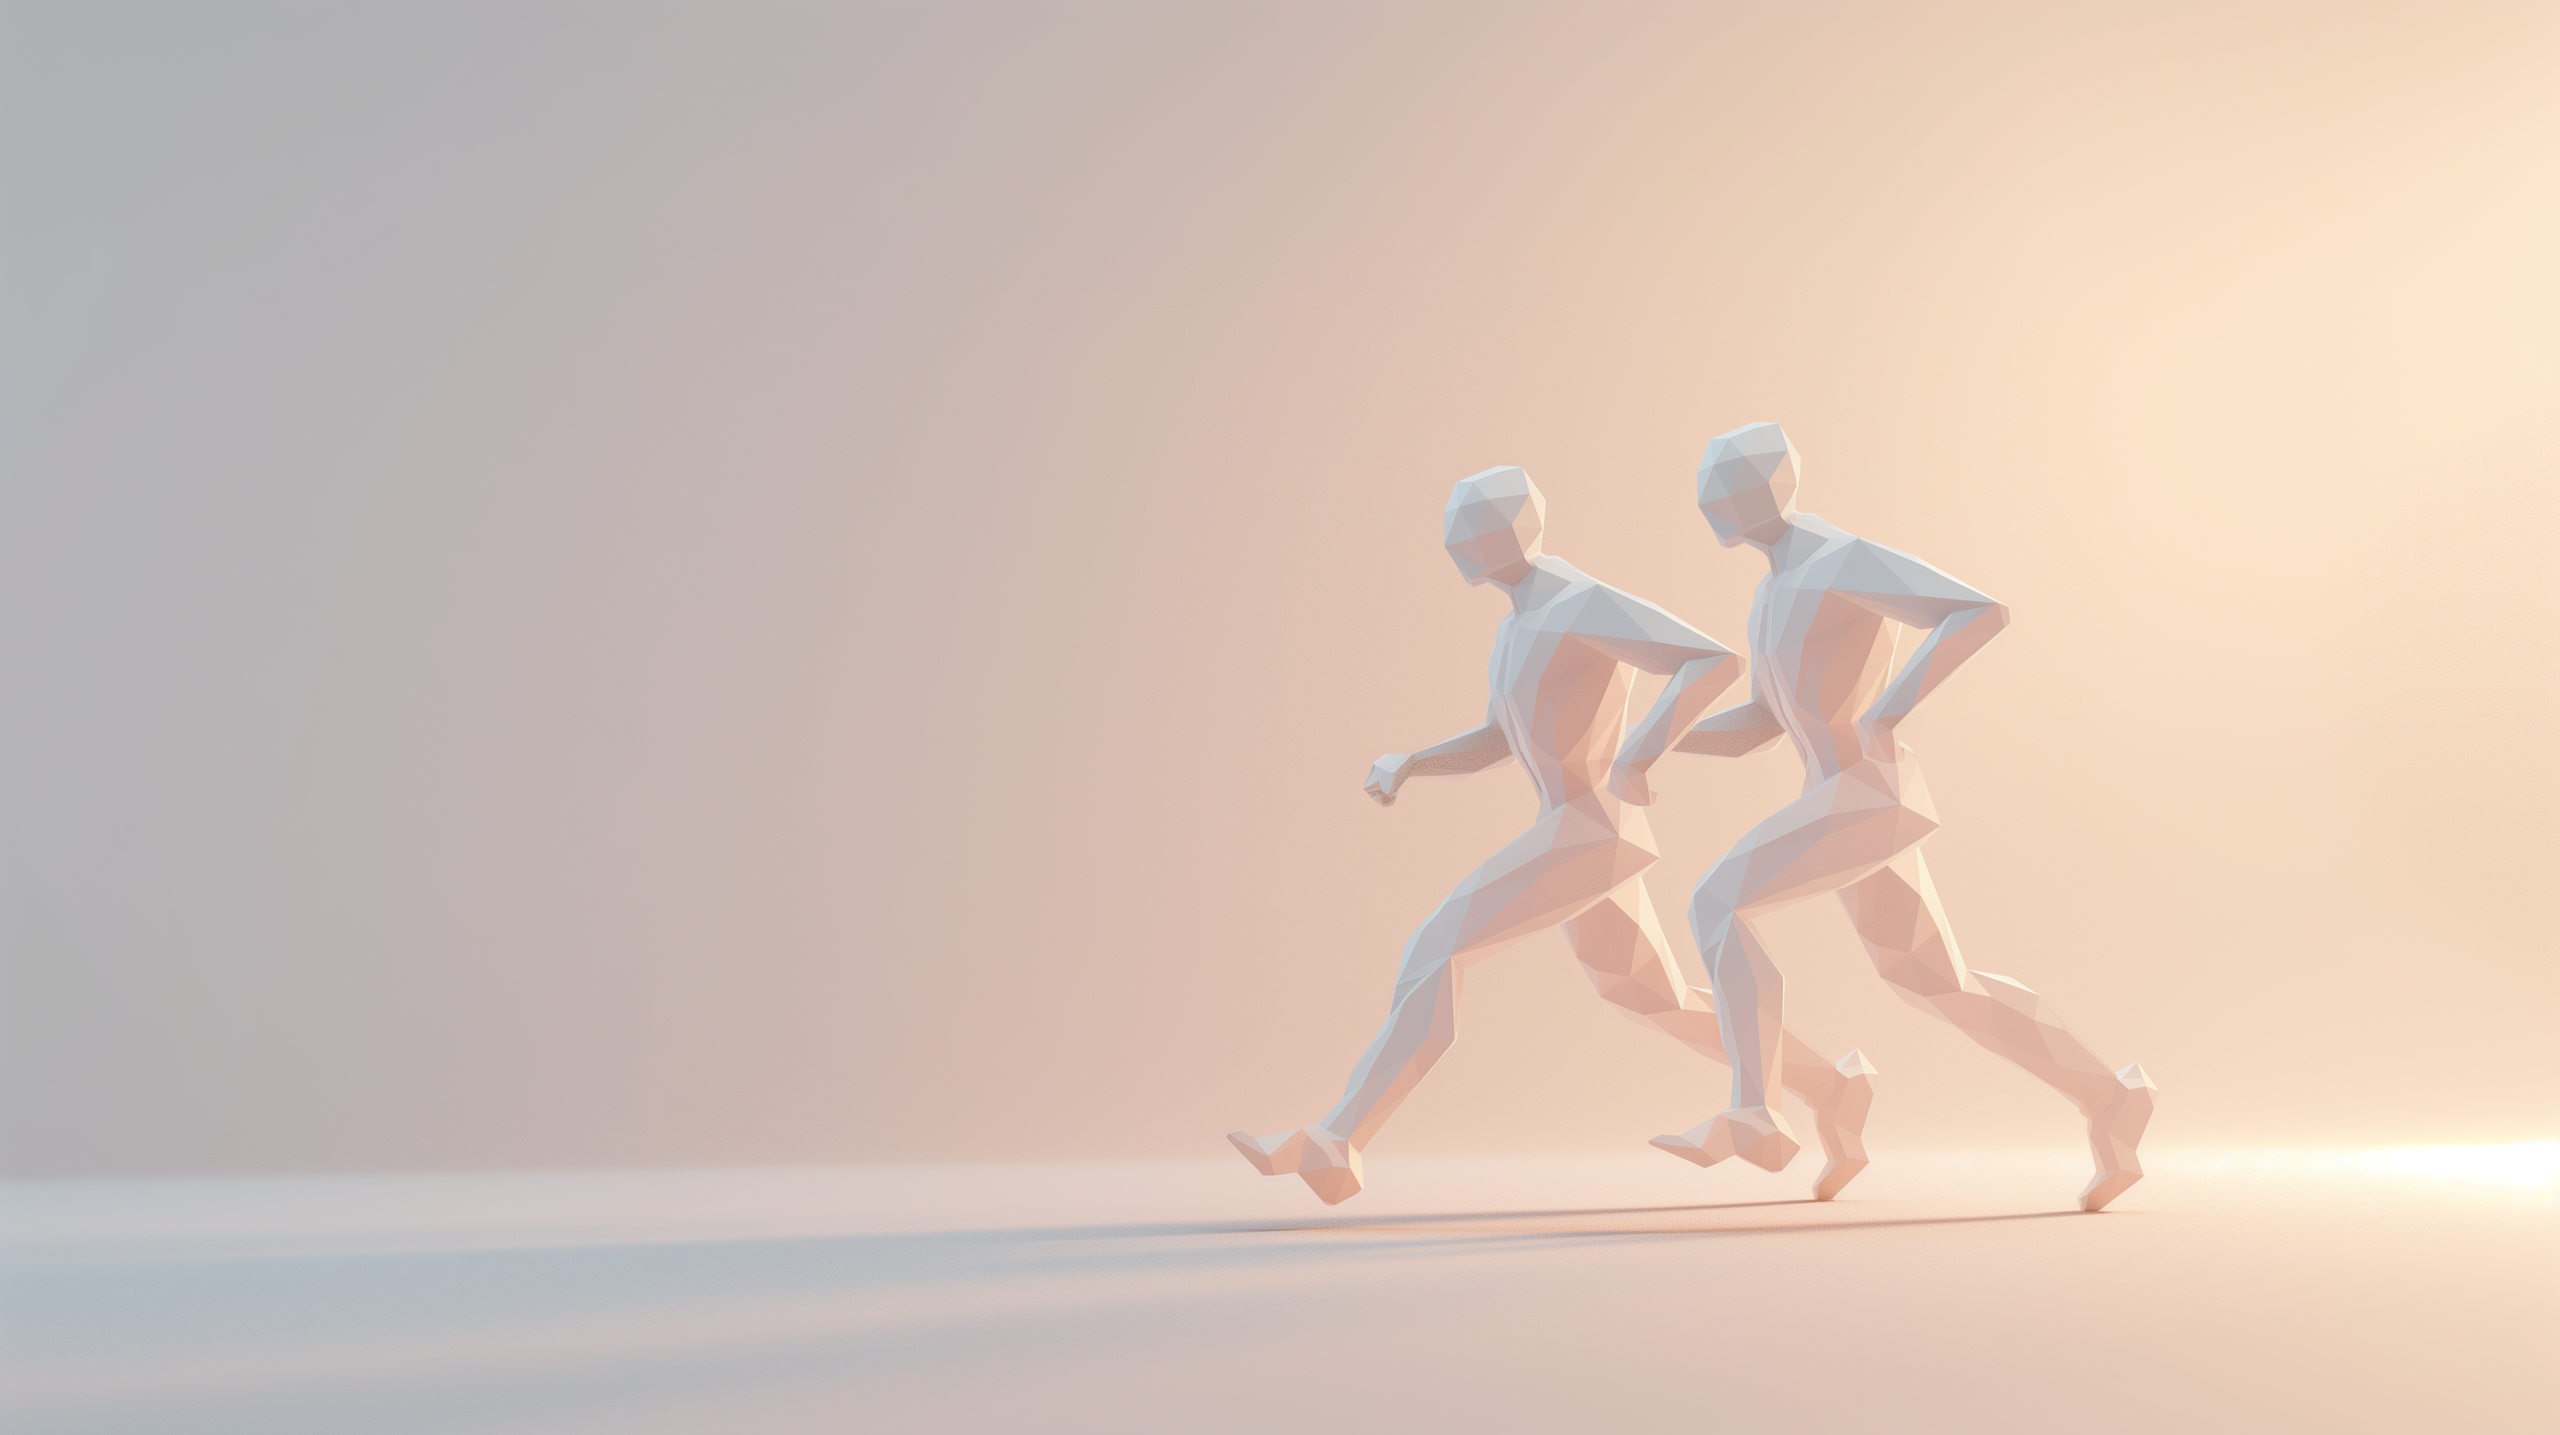 Abstract 3D Illustration of two people sprinting on a plain background